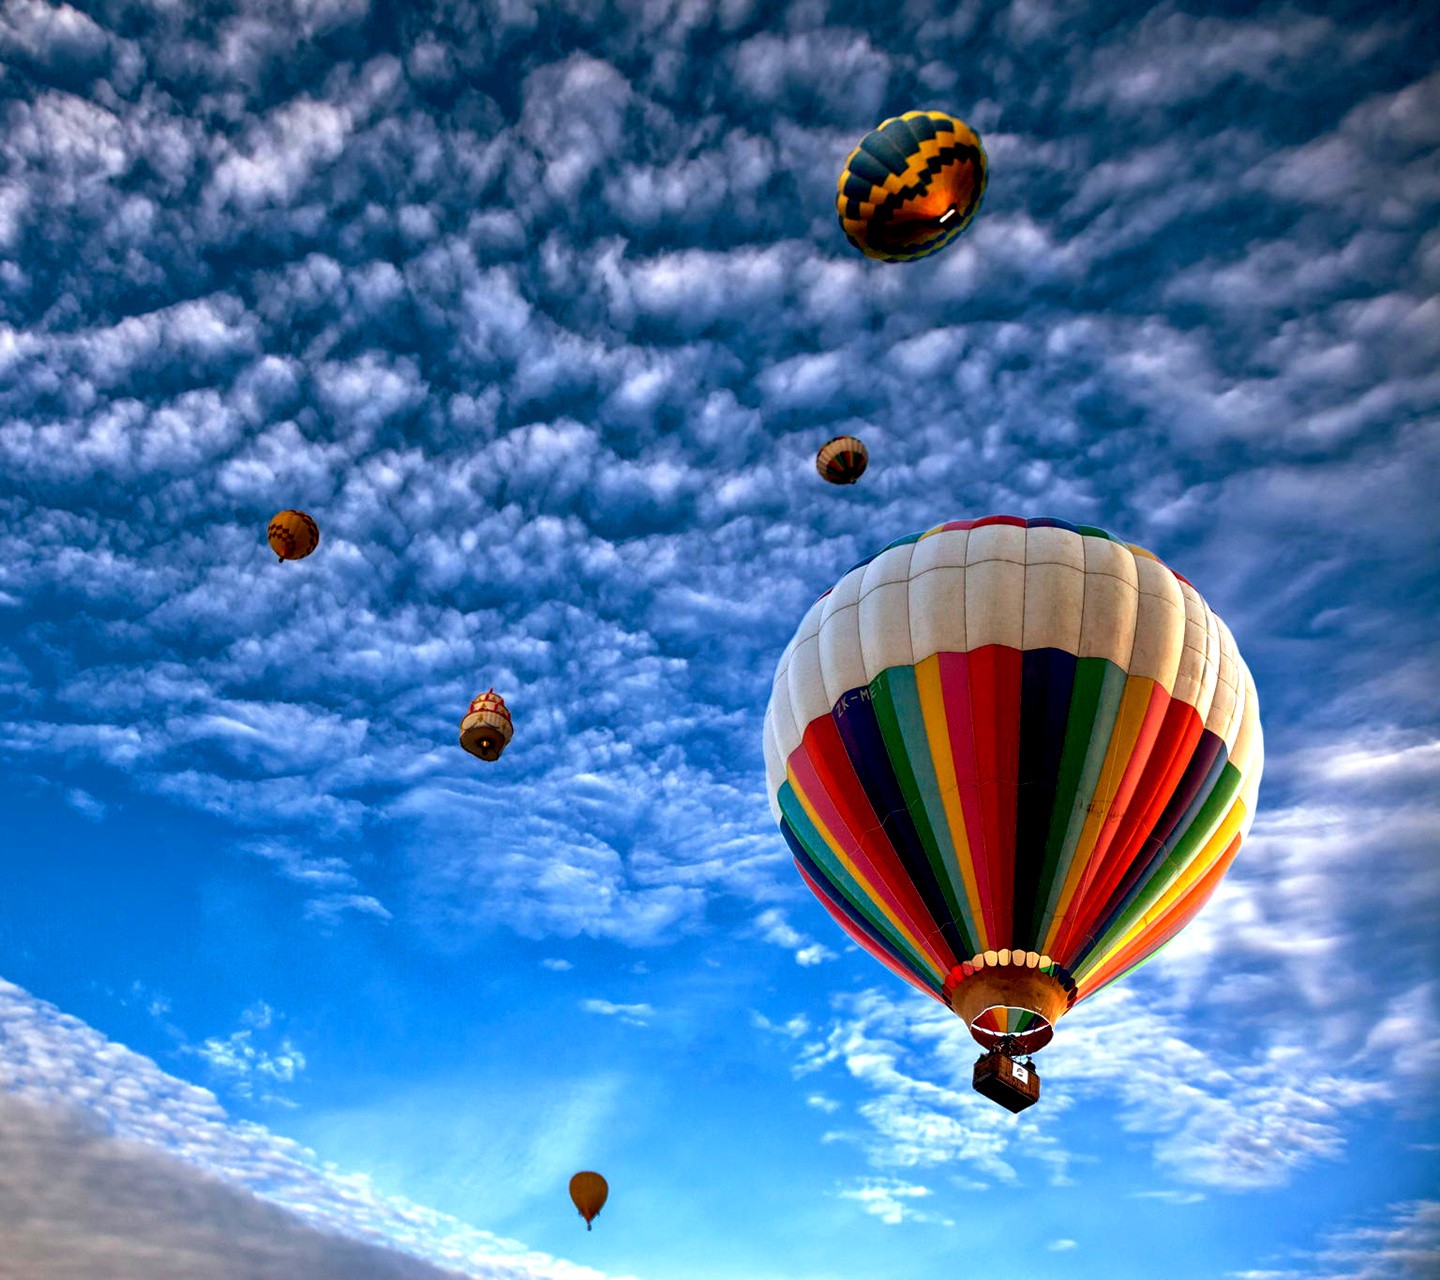 General 1440x1280 hot air balloons skyscape vehicle sky